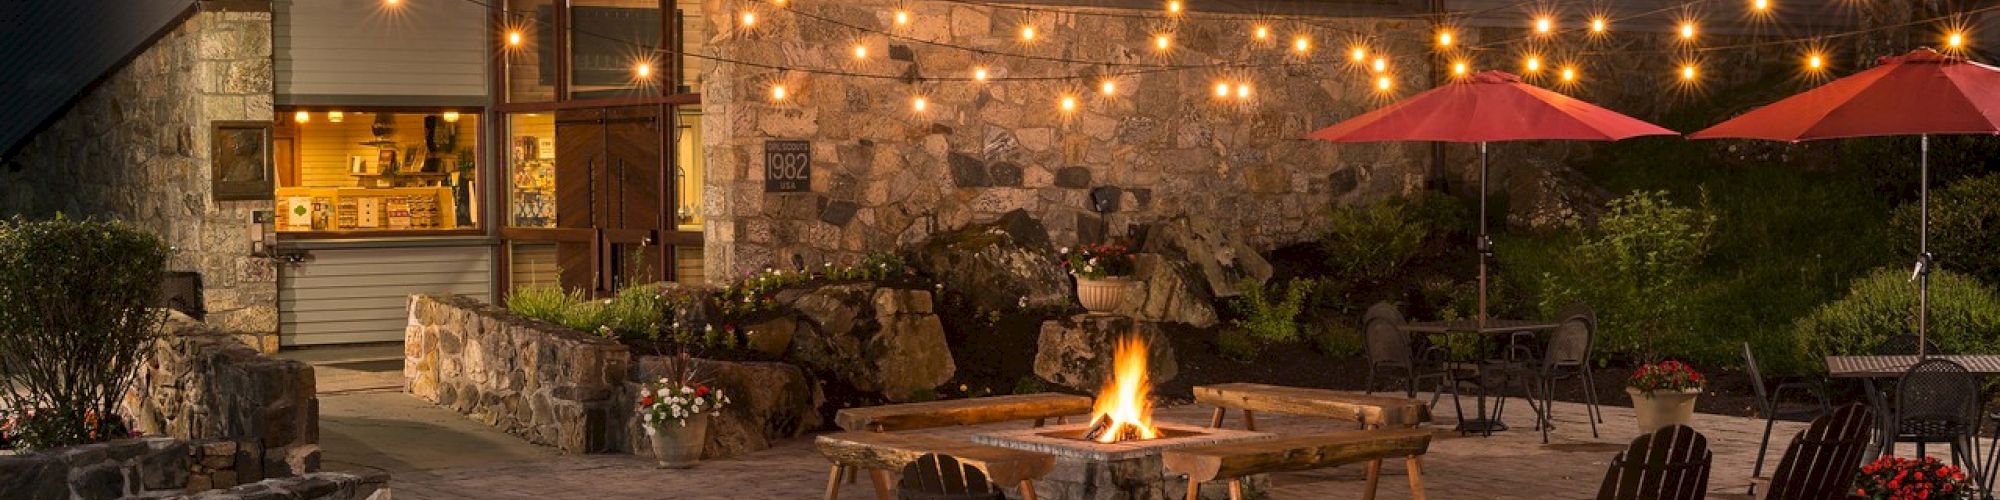 Cozy backyard patio at dusk with fire pit, string lights, chairs, and a house with interior lights on.